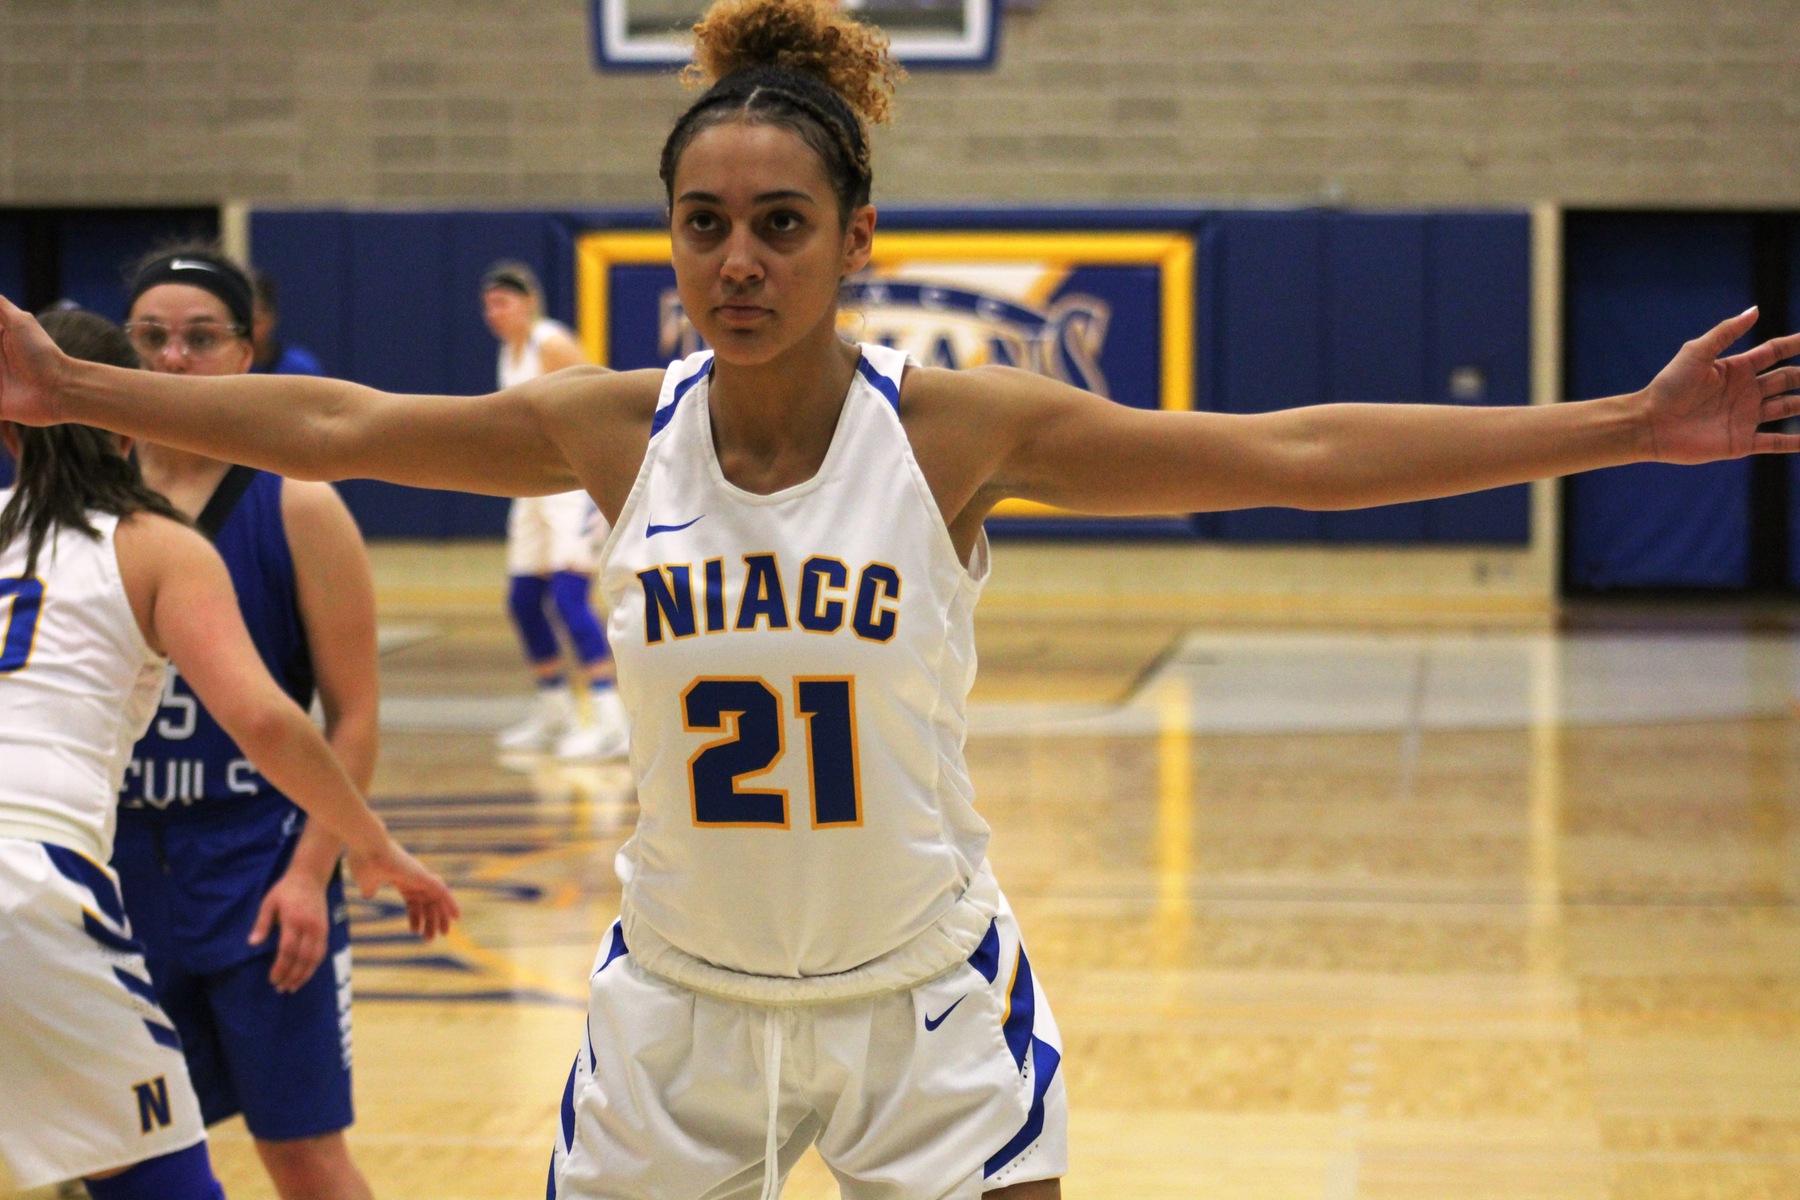 NIACC's Laker Ward defends in Tuesday's game against Riverland CC in the NIACC gym.